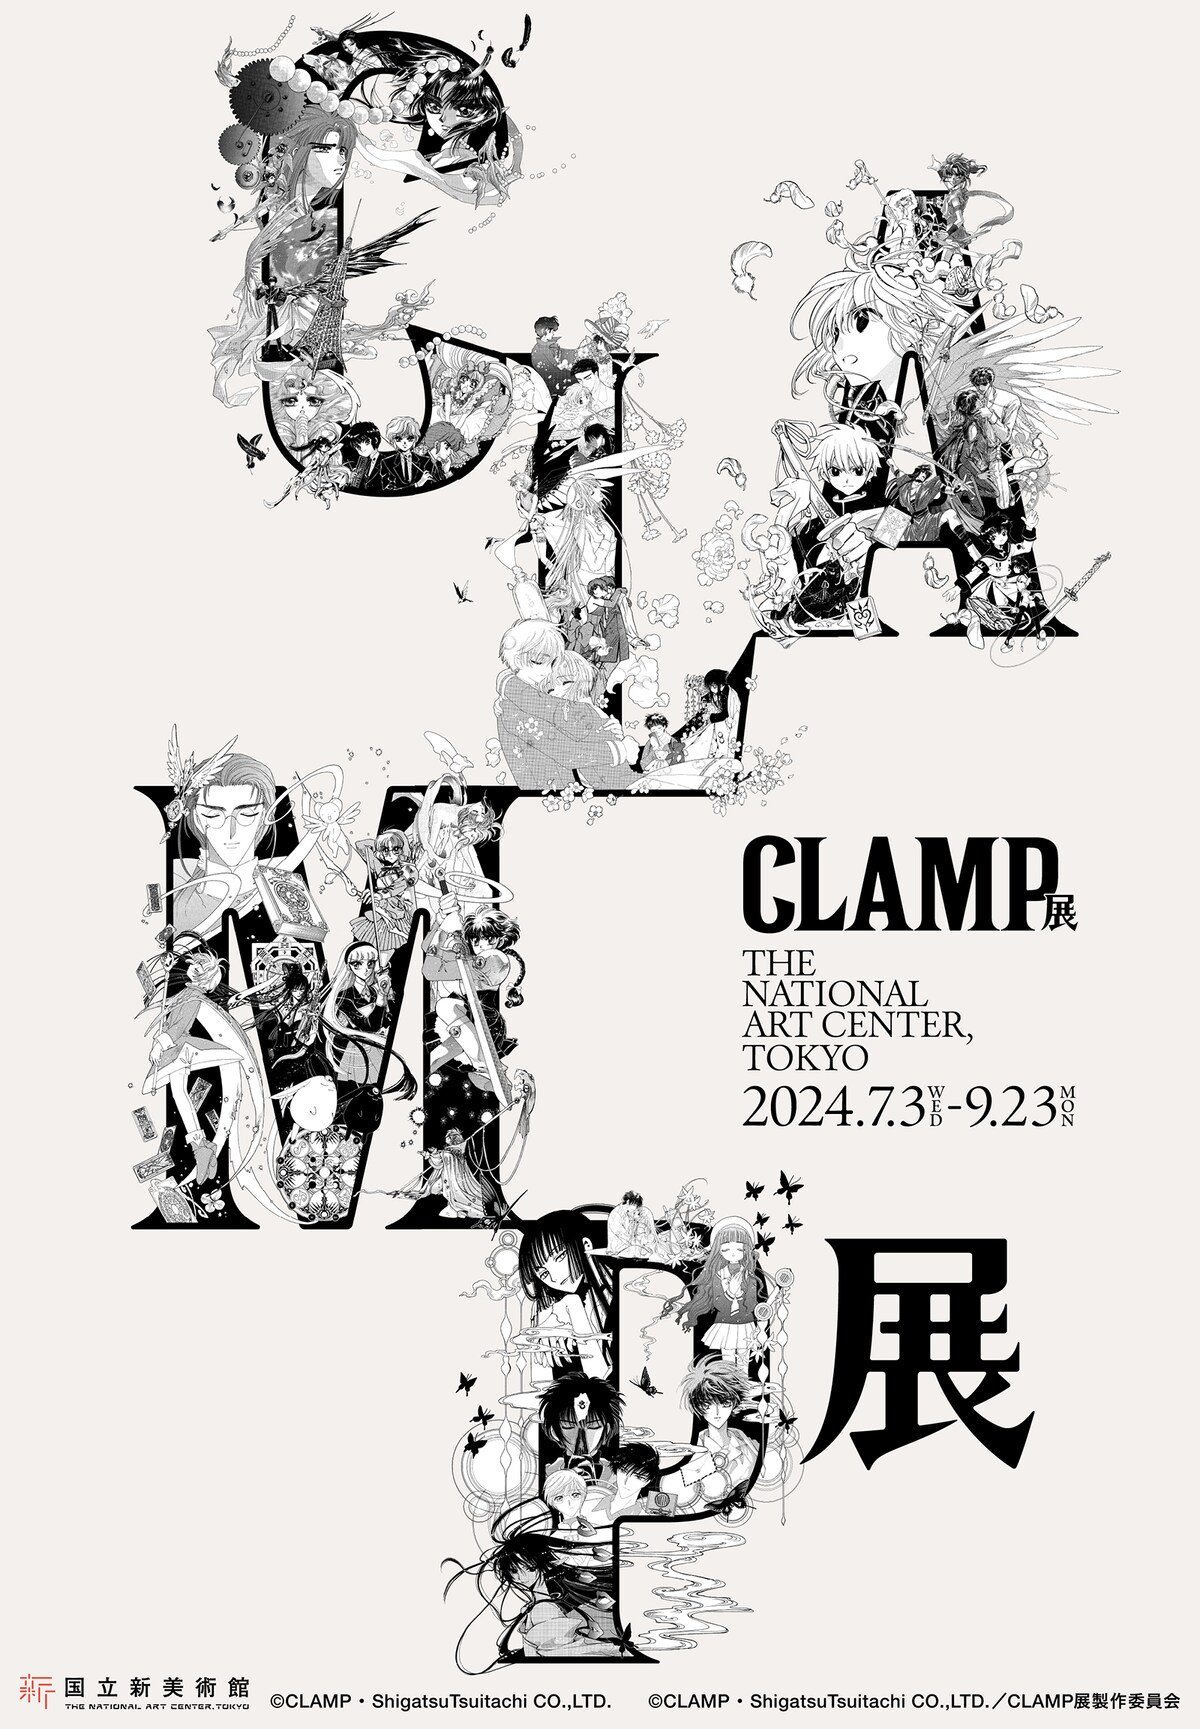 “CLAMP” Art Exhibition will have a special area titled ‘DREAM’ which will display completely new illustrations exclusively drawn for this event.